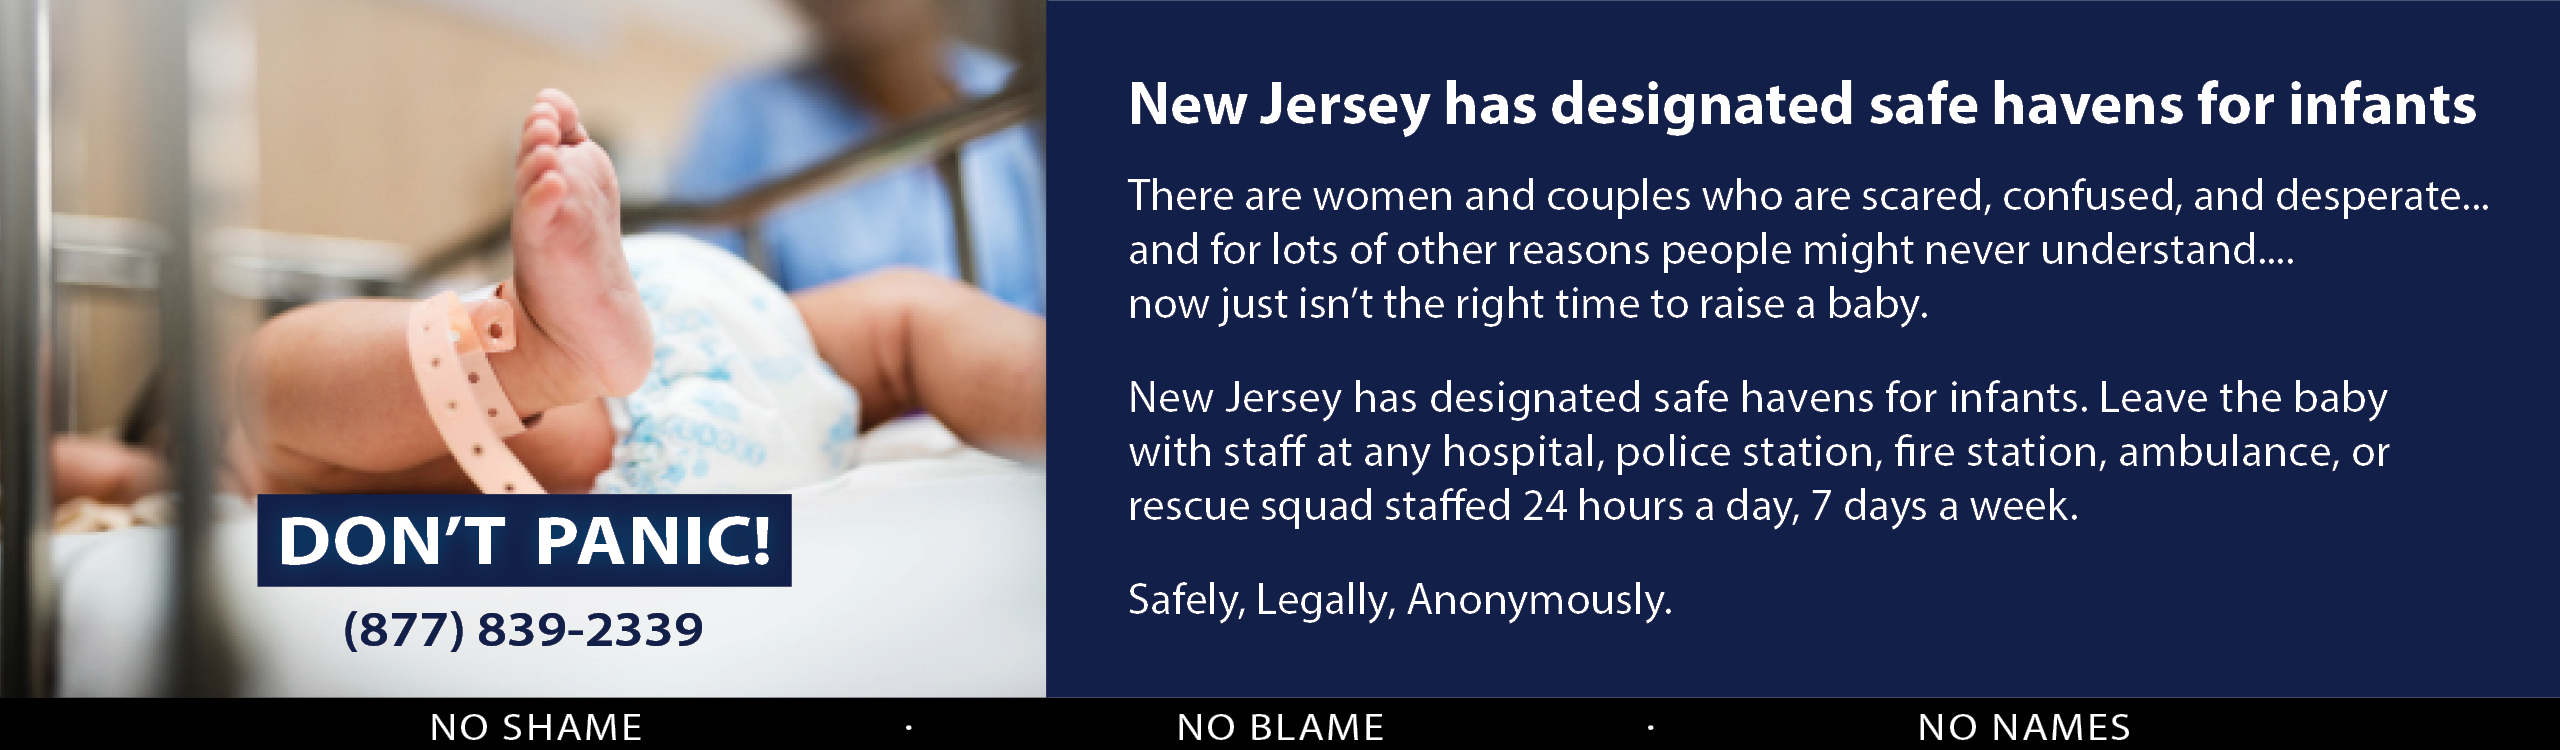 New Jersey has a safe haven for unwanted infants